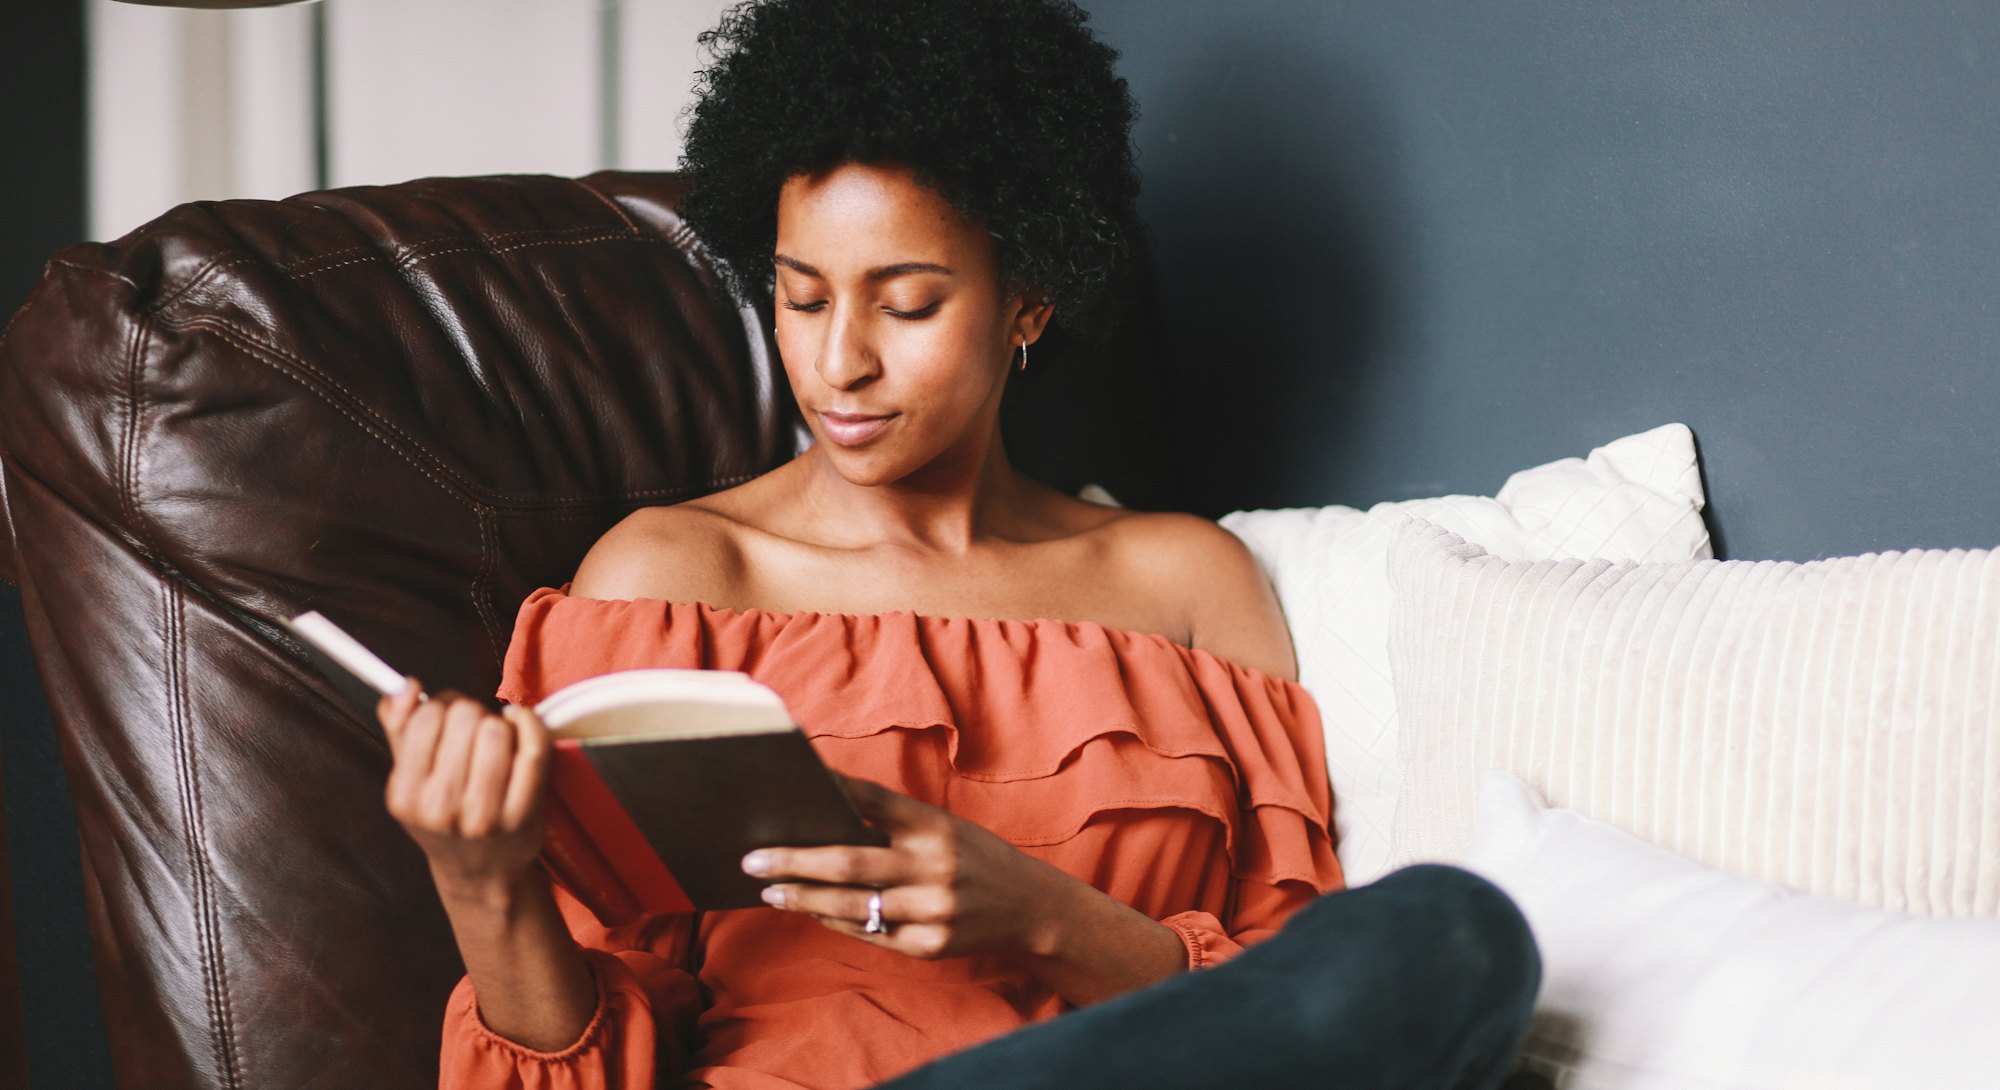 Young woman relaxing, reading a book.